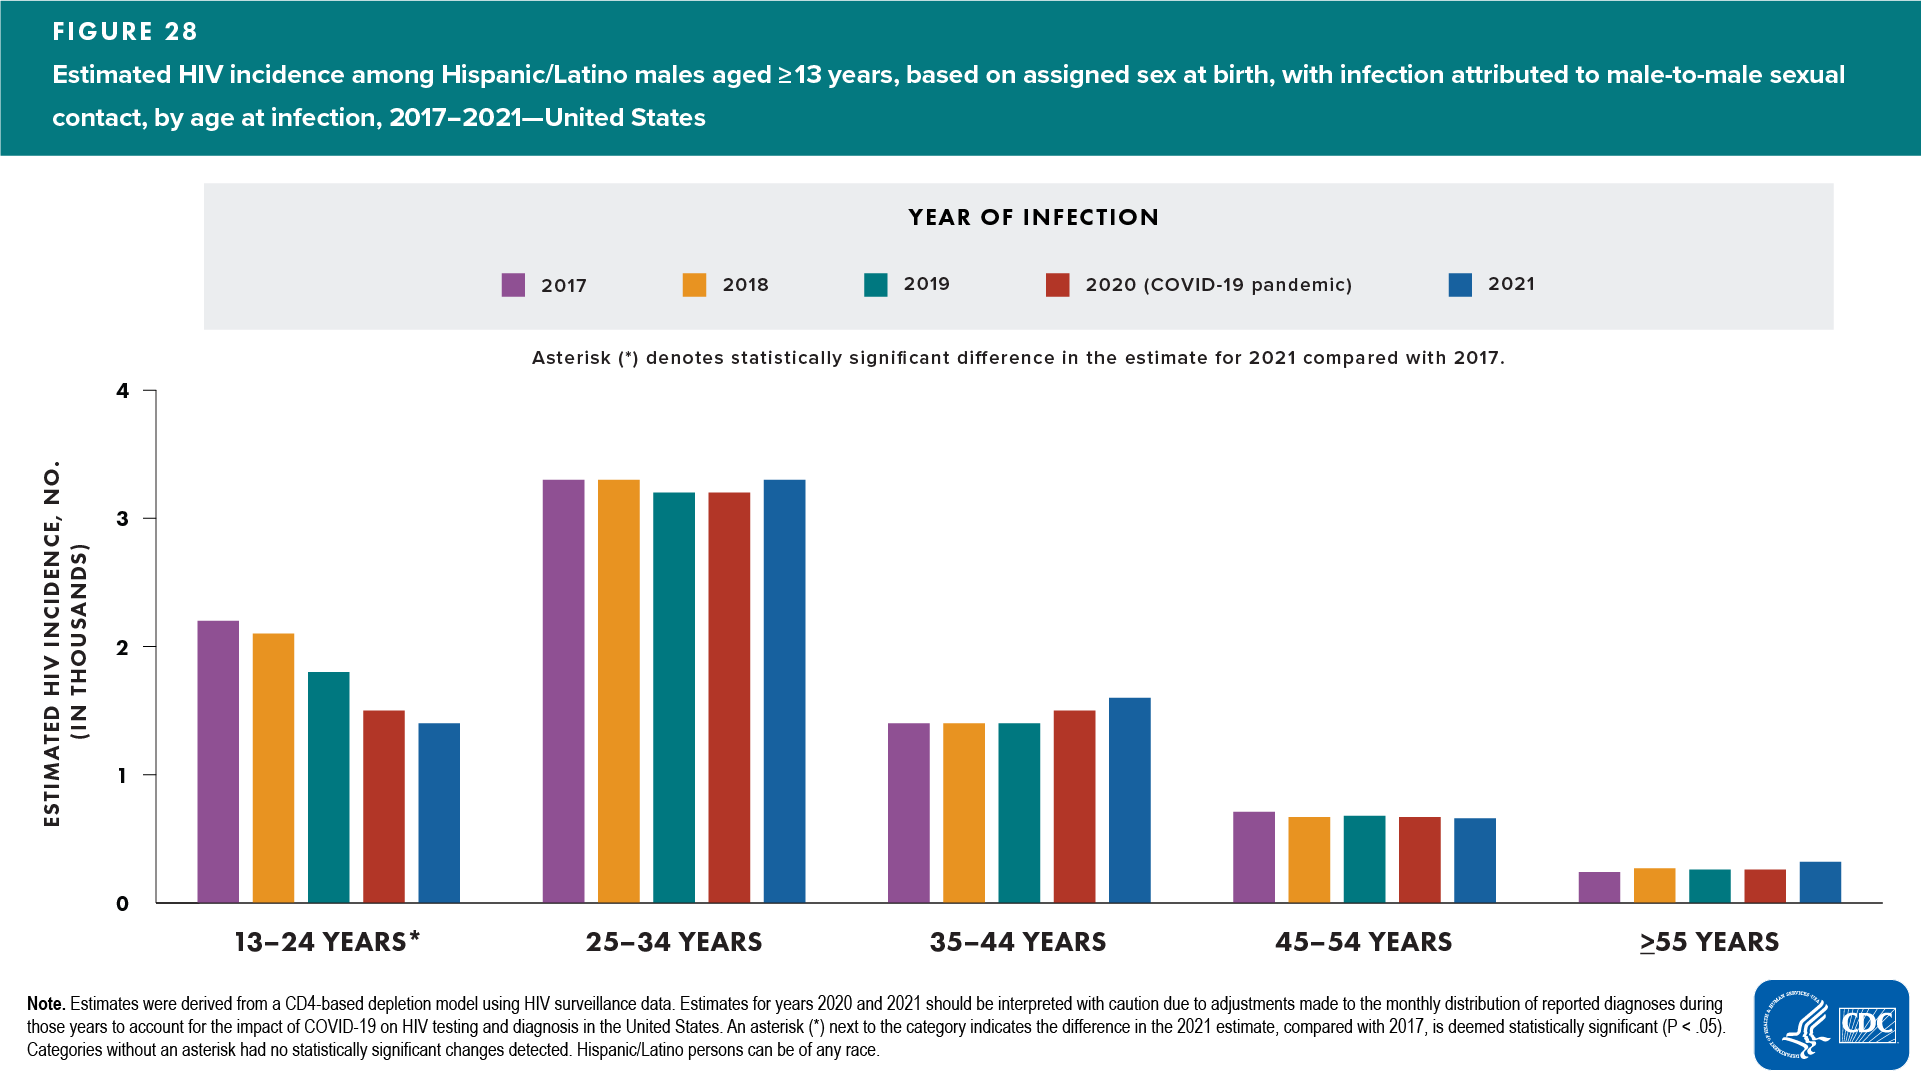 Figure 28. Estimated HIV incidence among Hispanic/Latino males aged ≥13 years, based on assigned sex at birth, with infection attributed to male-to-male sexual contact, 2017–2021—United States